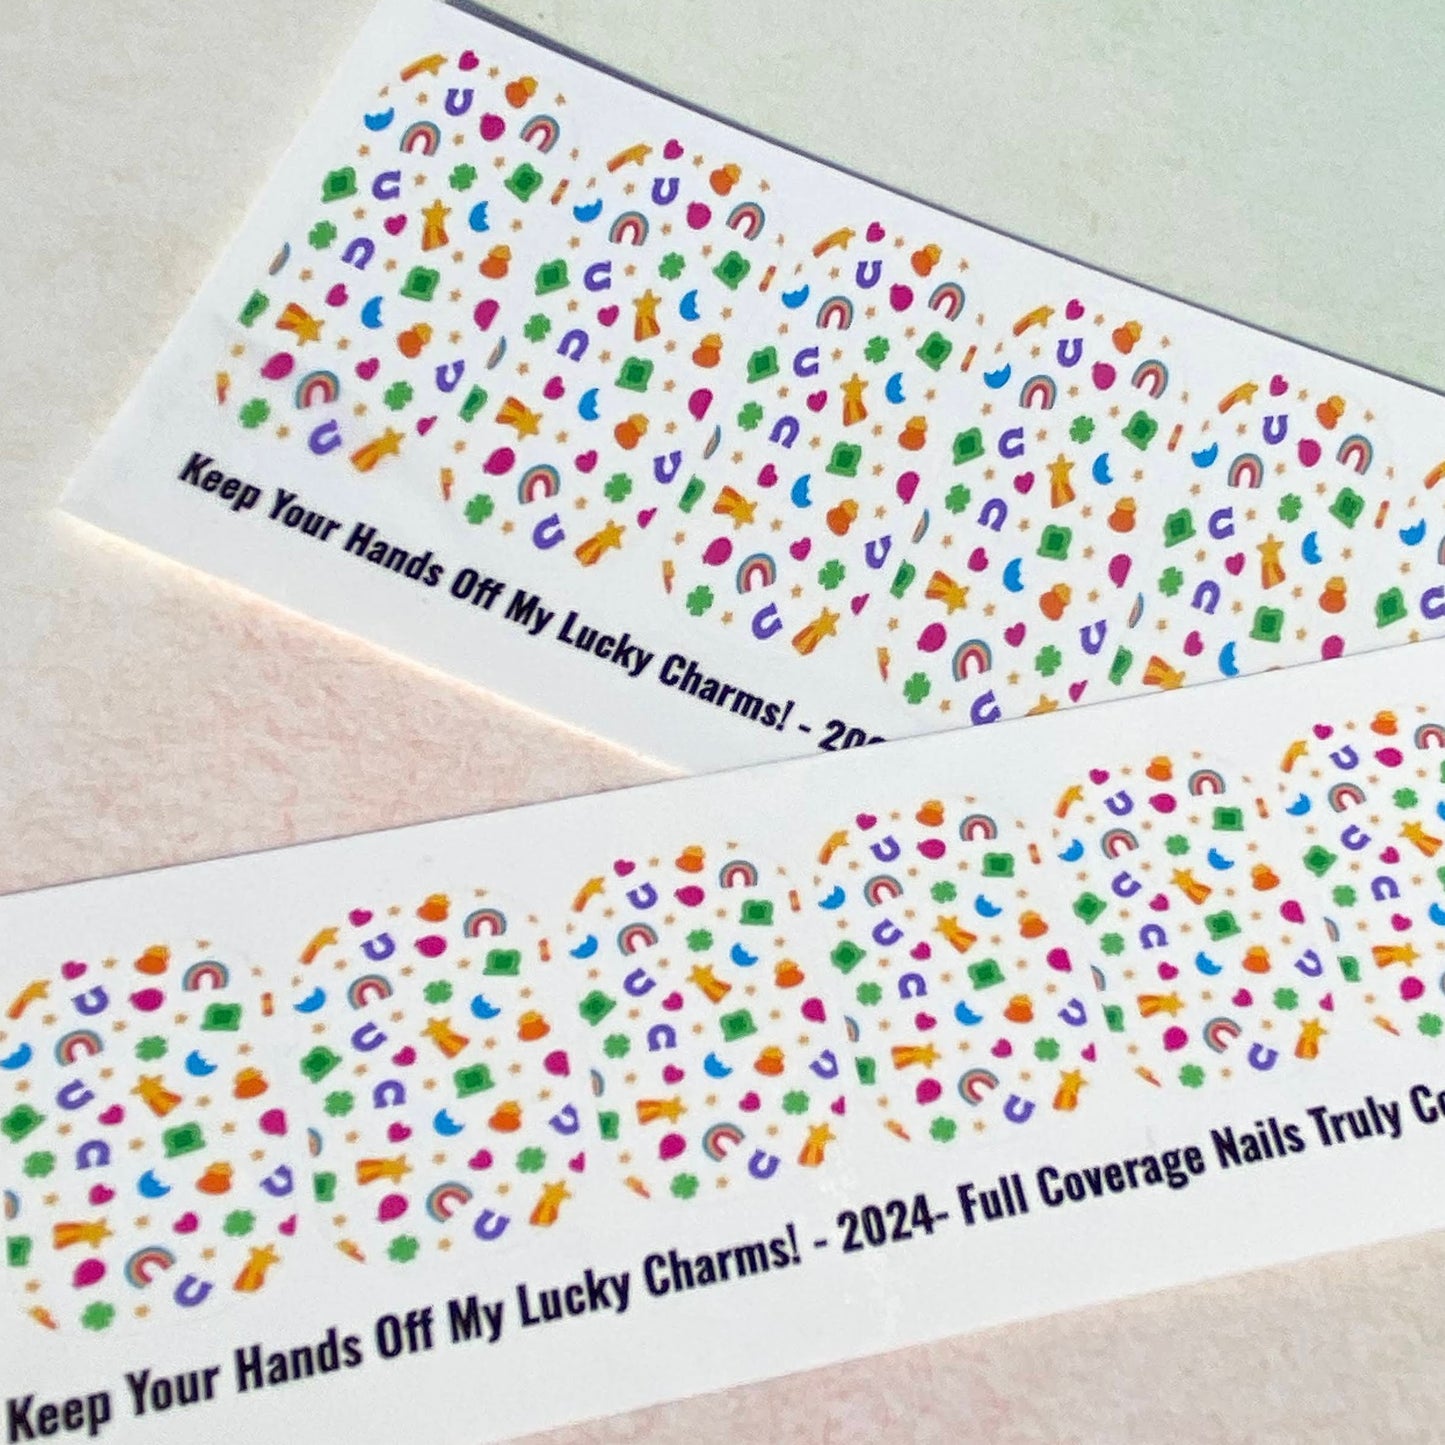 St. Patrick's Day Nail Wrap Decals- Keep Your Hands Off My Lucky Charms!